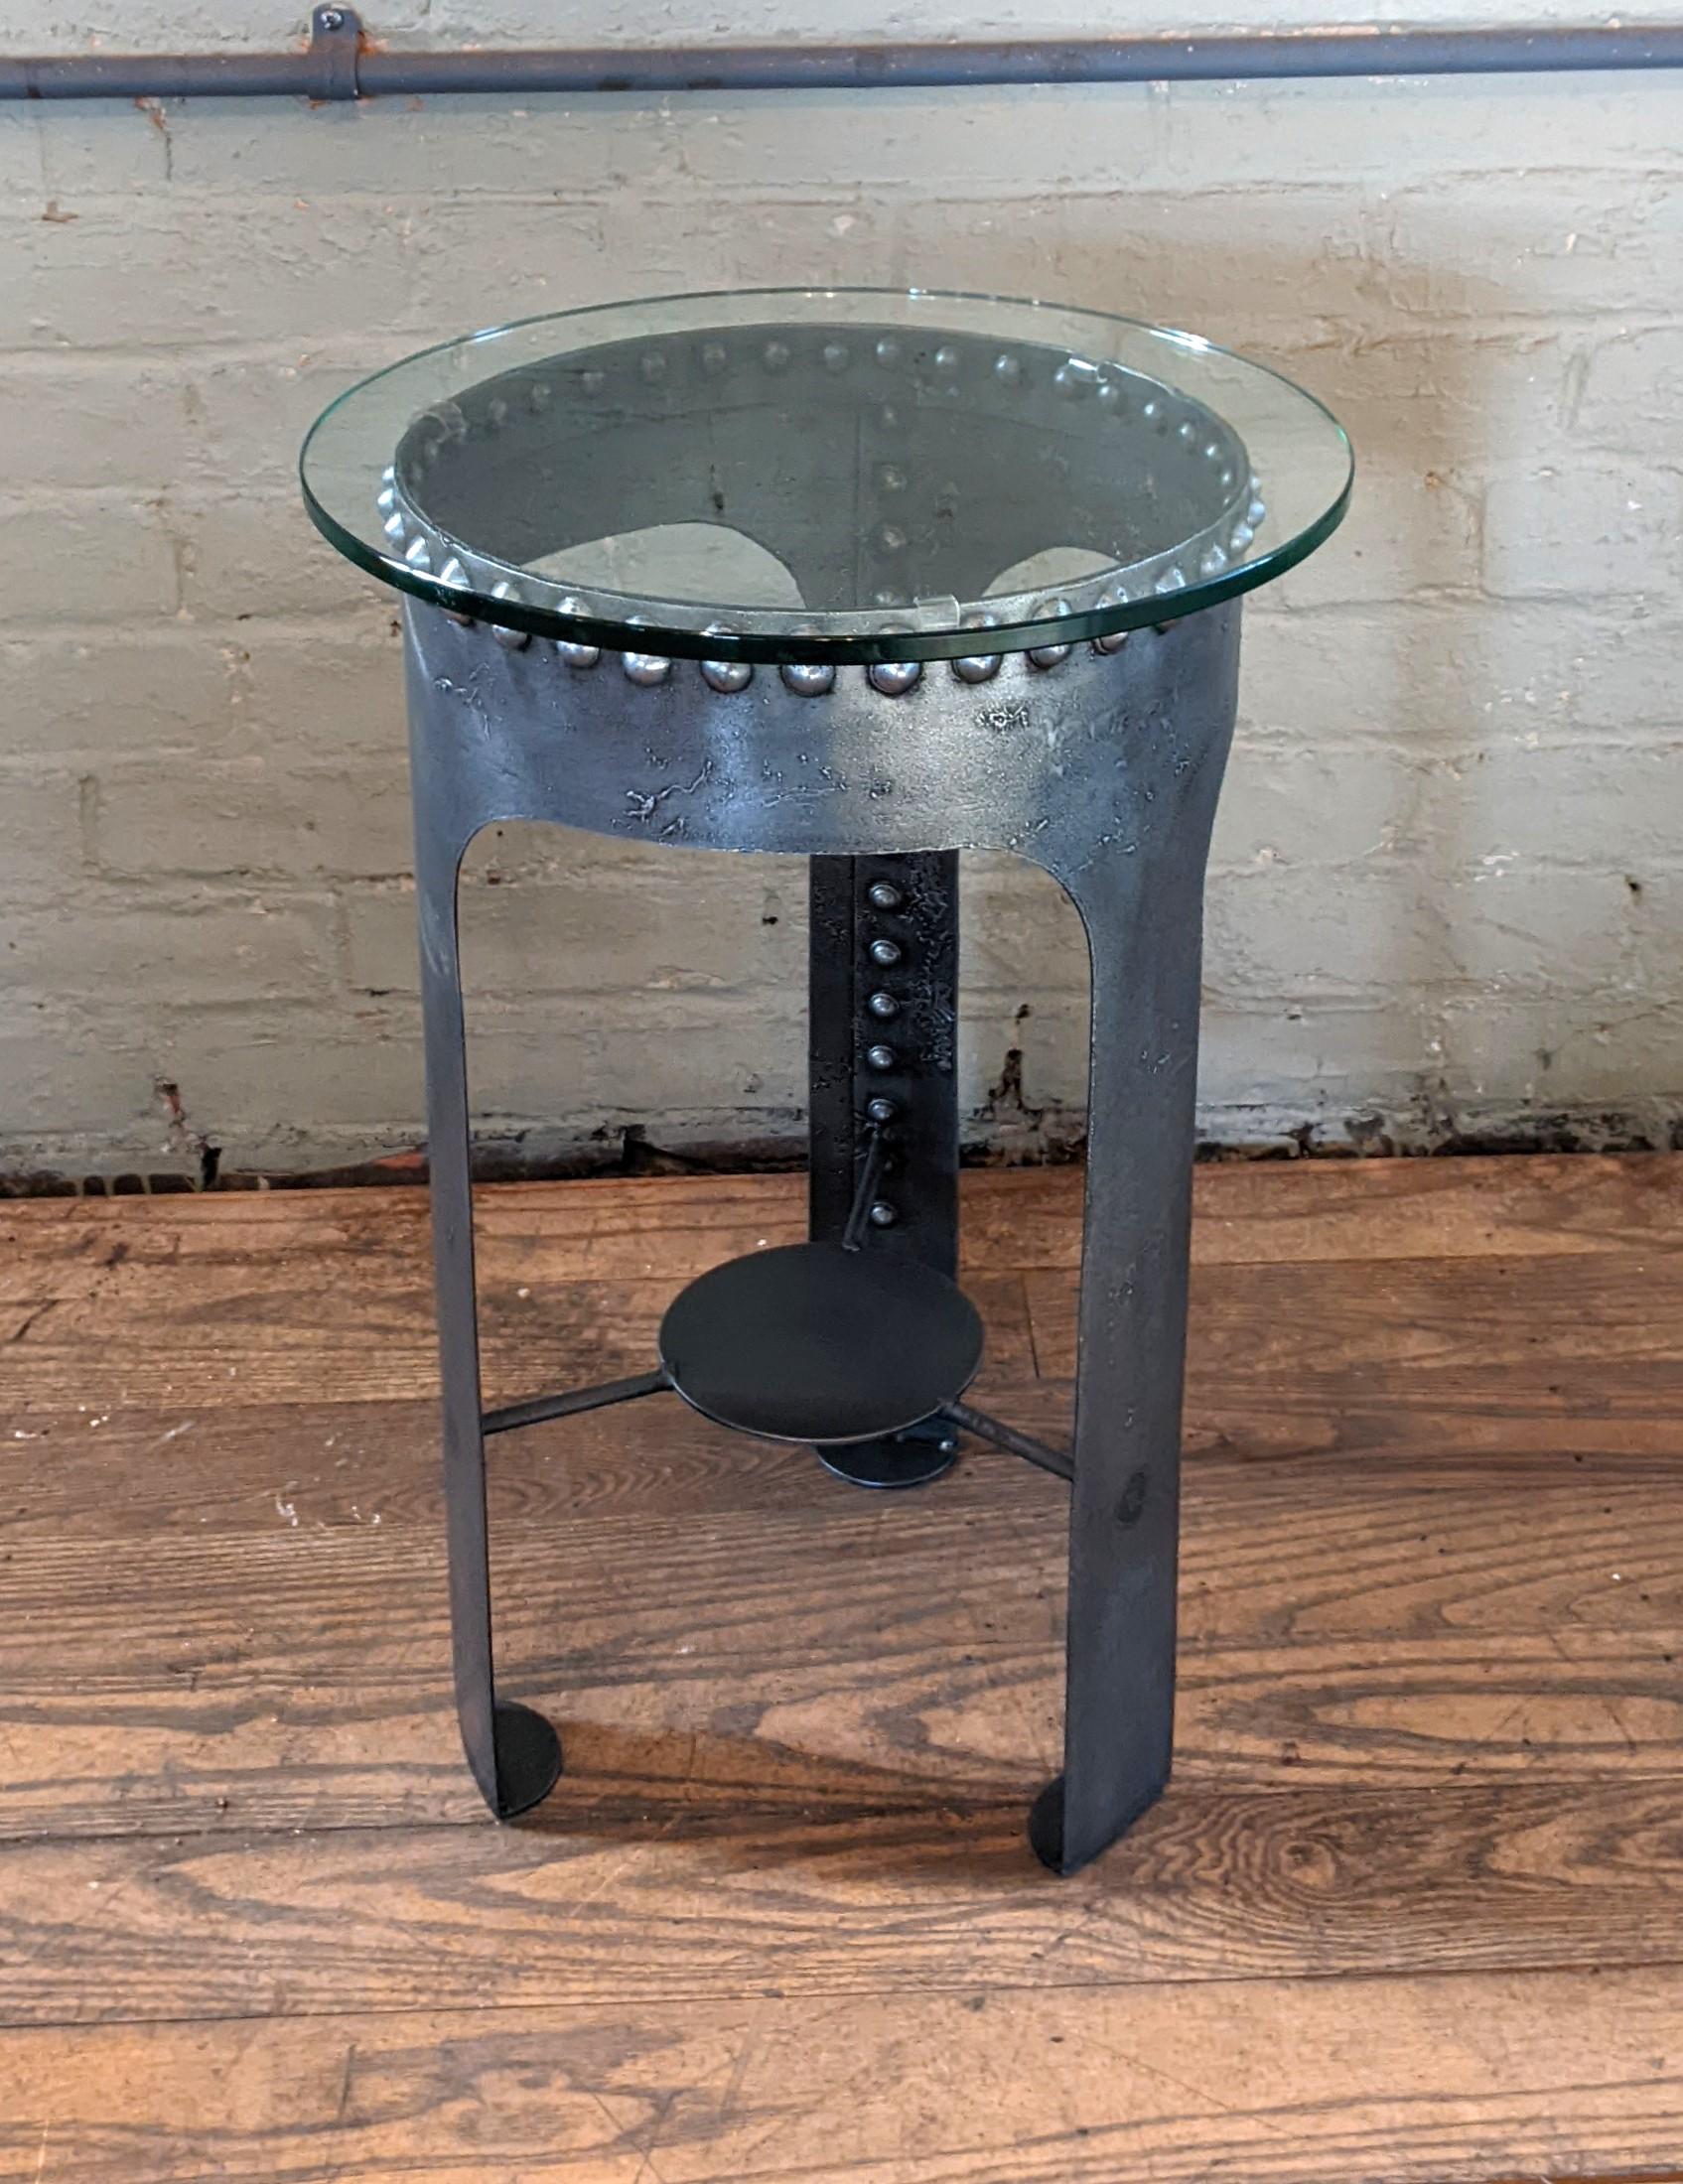 Steel Riveted end table 

Built from Vintage Riveted Steel Water Tanks

Overall Dimensions: 12